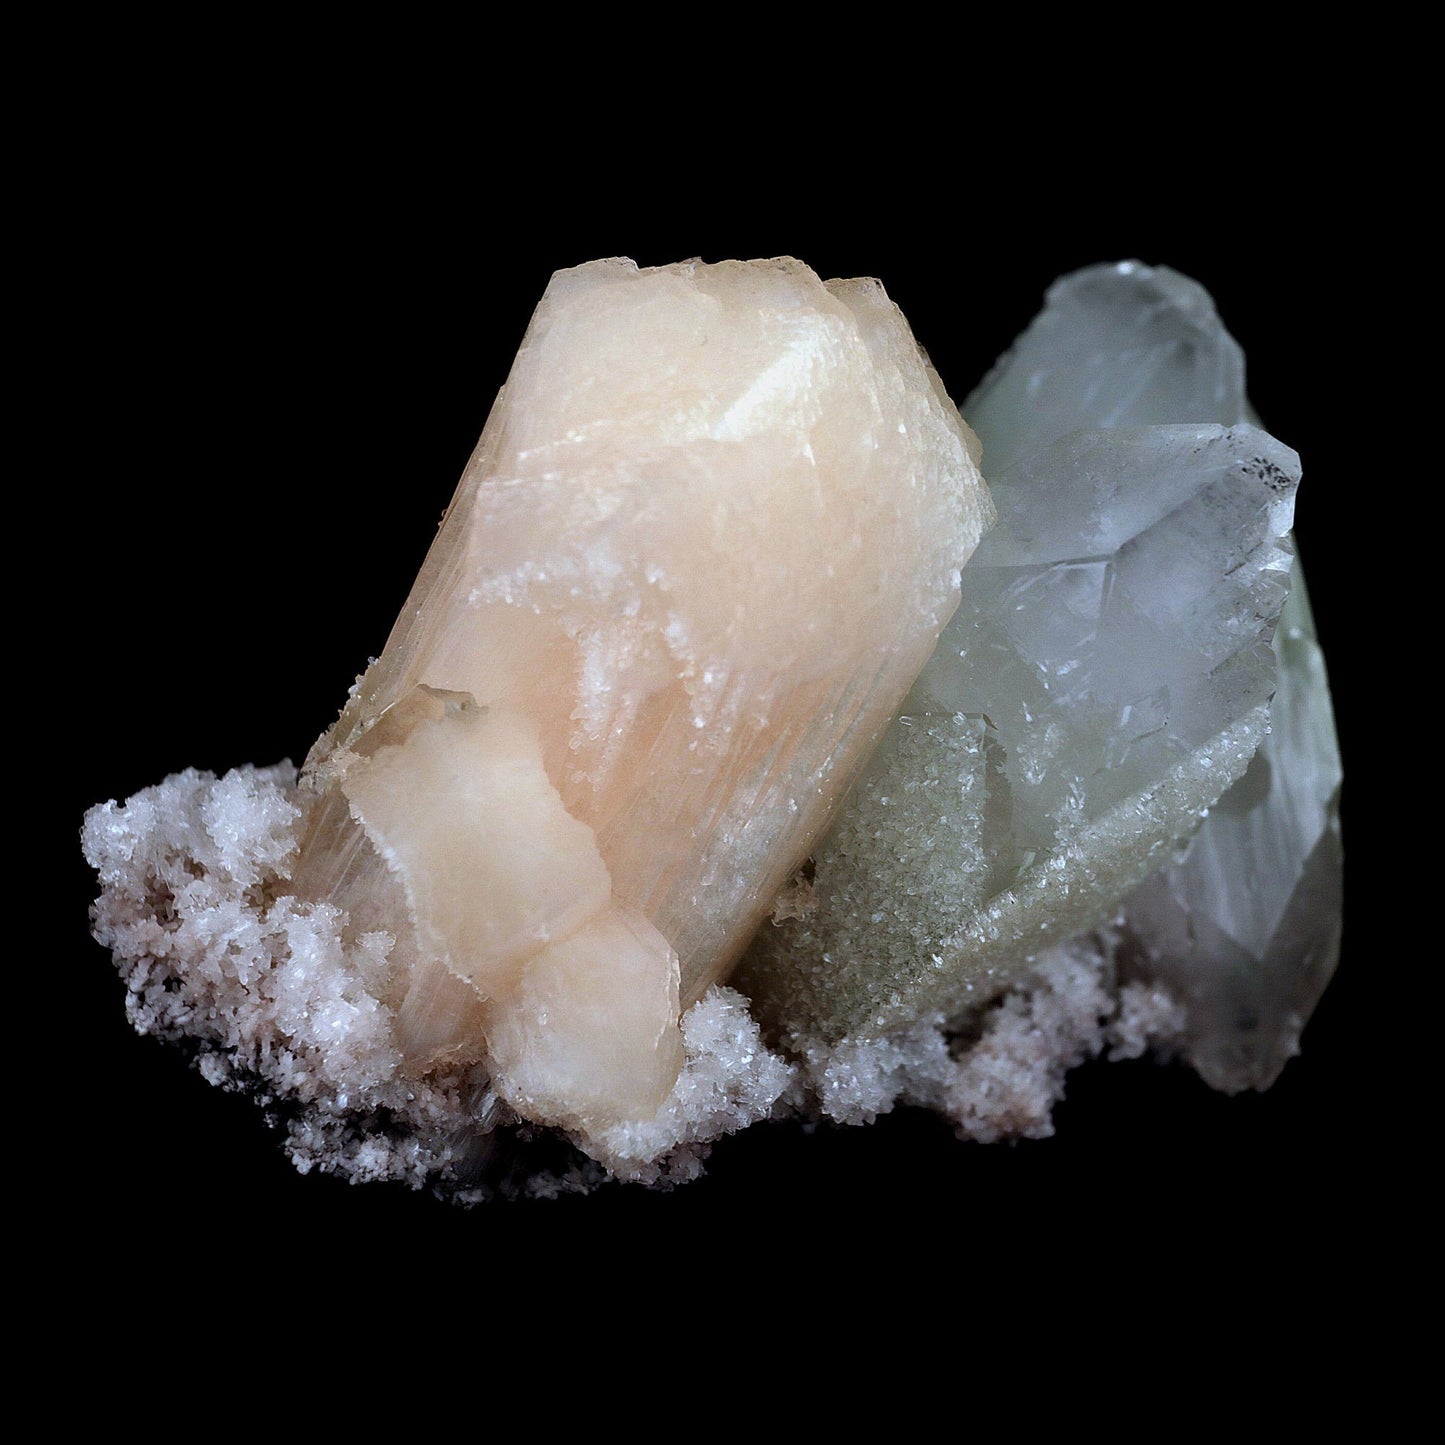 Fluro Apophyllite With Stilbite on Chalcedony Natural Mineral Specimen…  https://www.superbminerals.us/products/fluro-apophyllite-with-stilbite-on-chalcedony-natural-mineral-specimen-b-4428  Features: Jalgaon's elegant cluster of classic two-toned apophyllite crystals. The sharply tetragonal, very glassy crystals have striking water-clear, gem, colourless steeply pyramidal terminations and subtle pastel-green bodies. The large doubly terminated crystal measures 7.8 cm in length